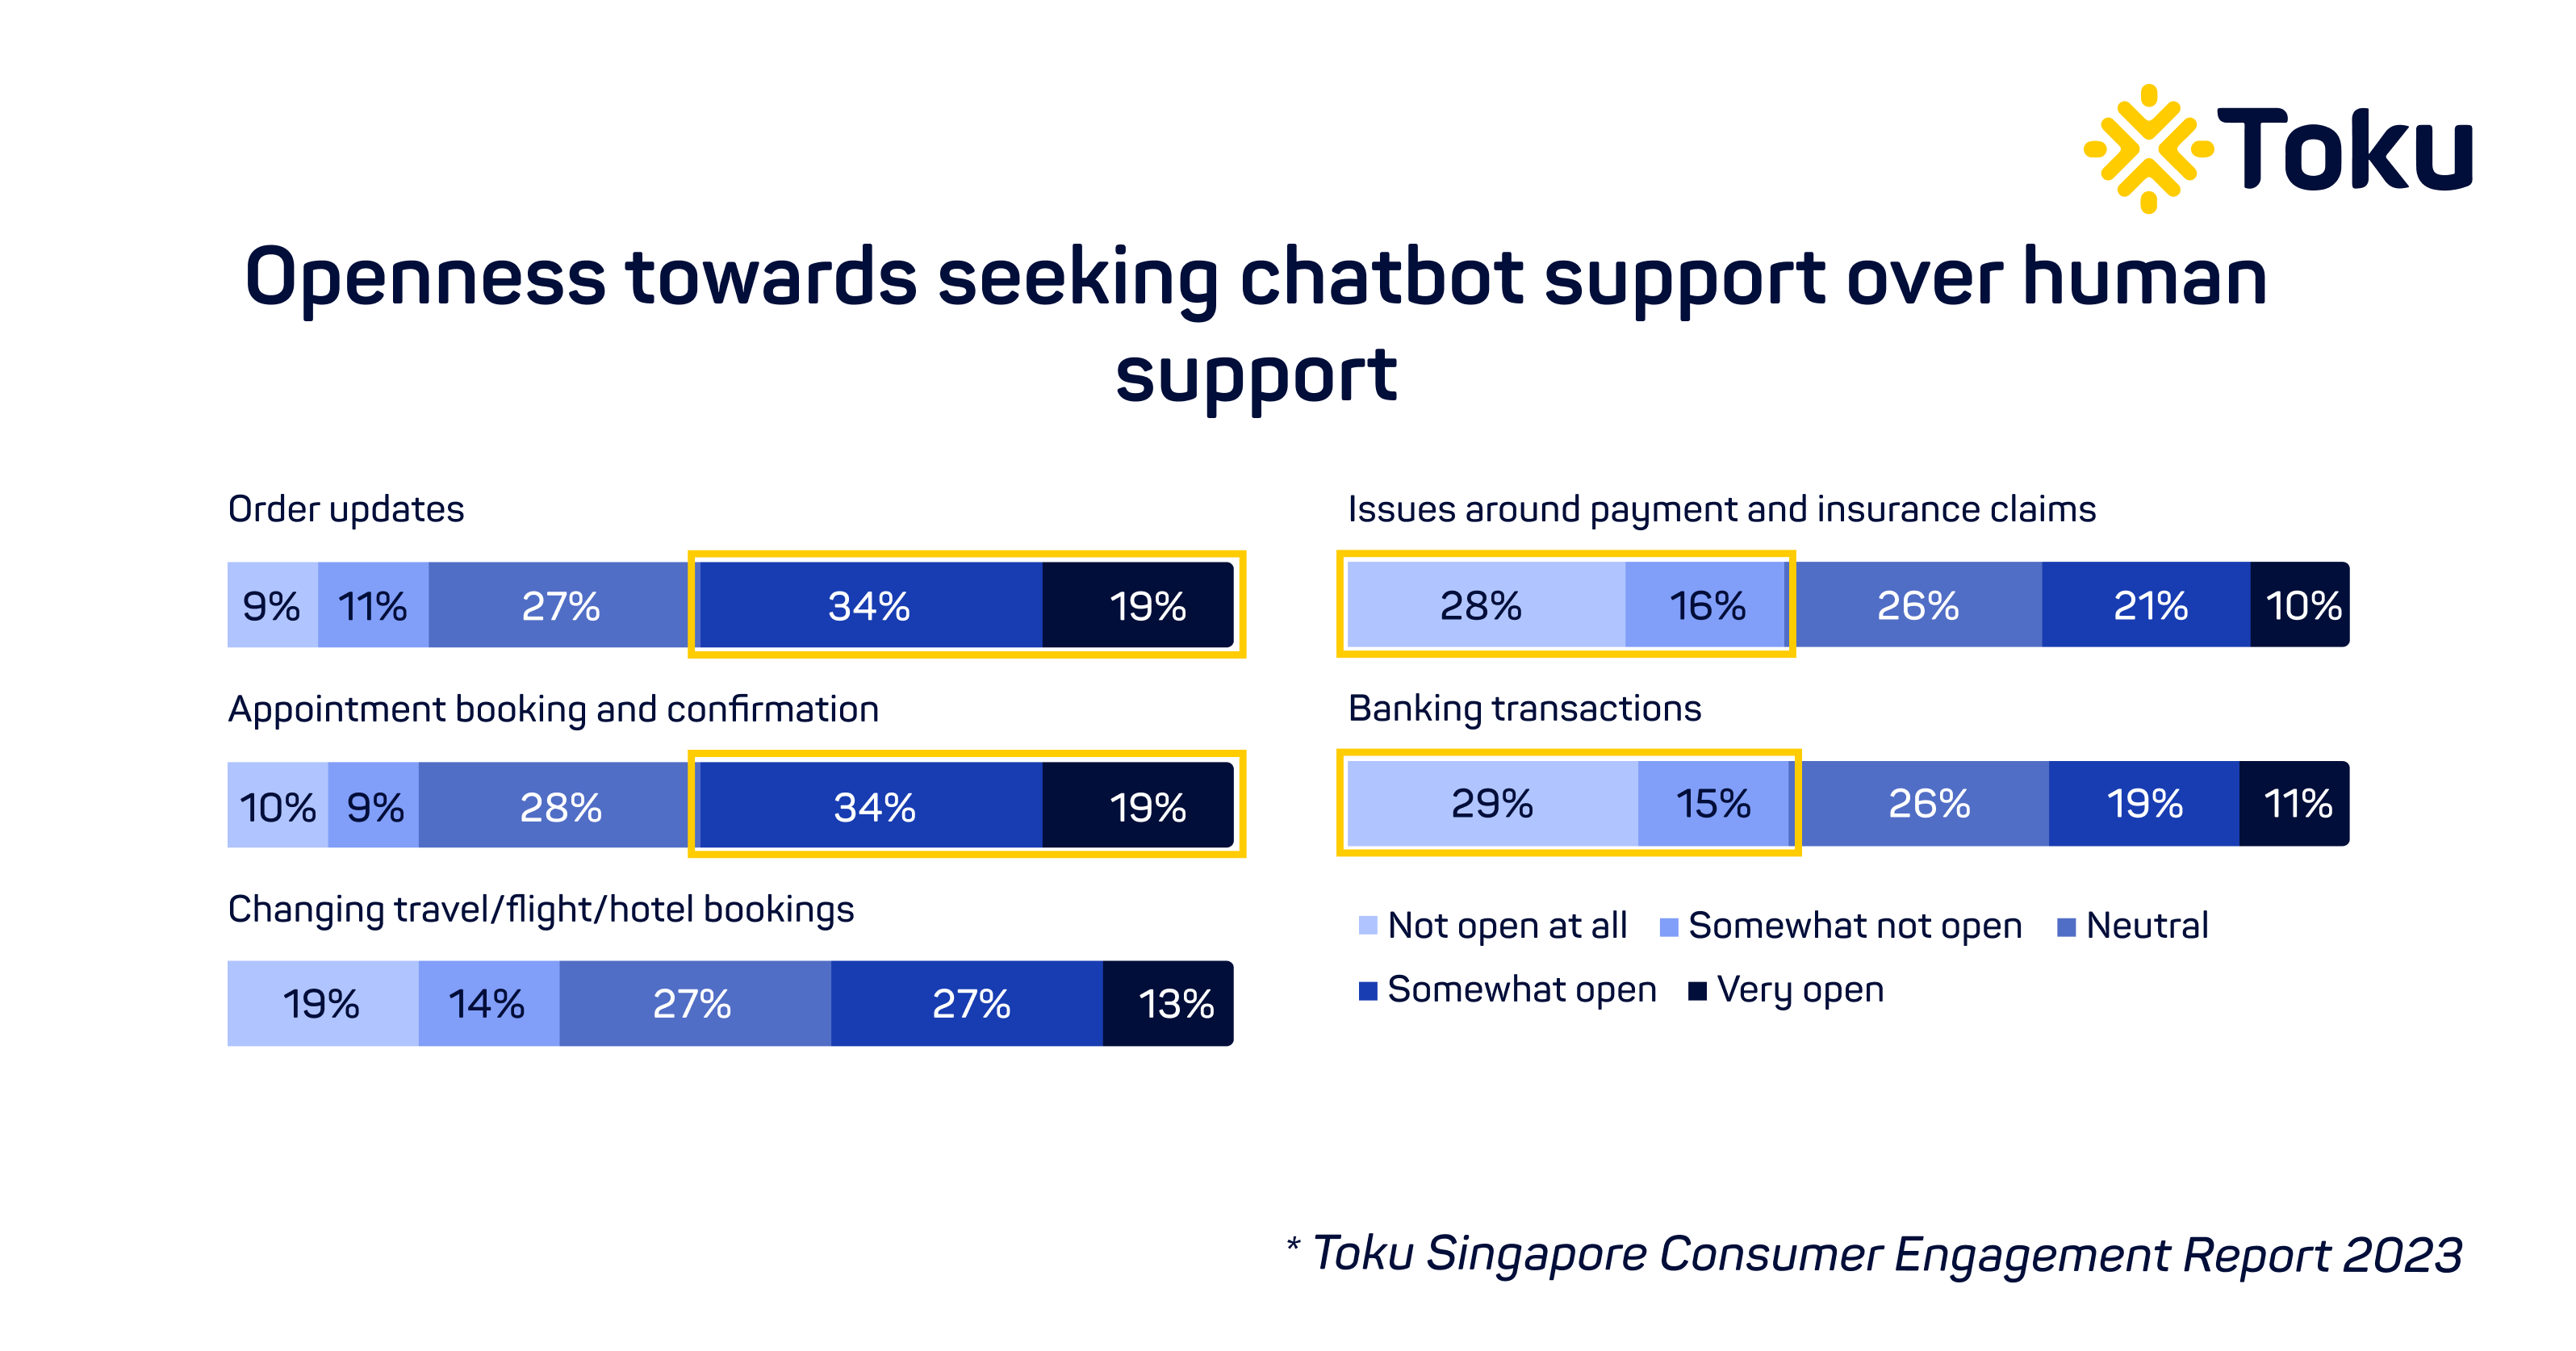 2023 consumer openness towards chatbot support over human support